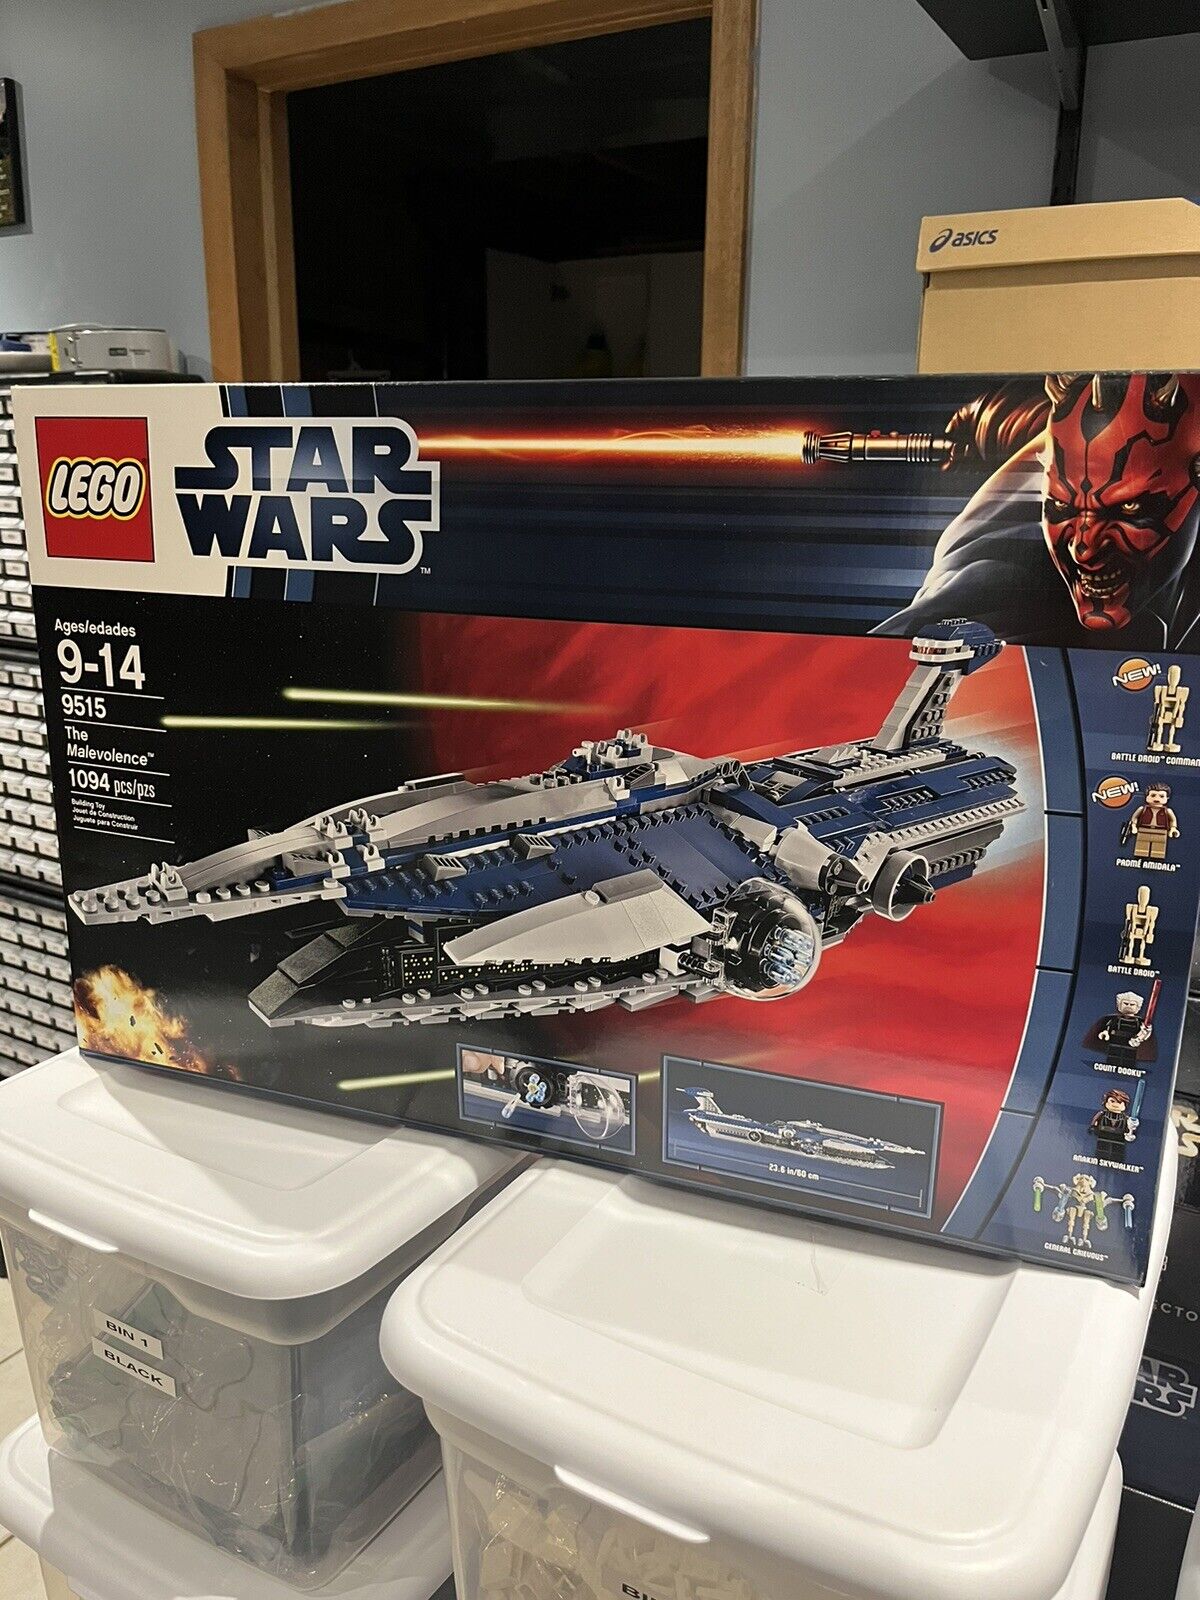 LEGO Star Wars 9515 The Malevolence - New in sealed box 